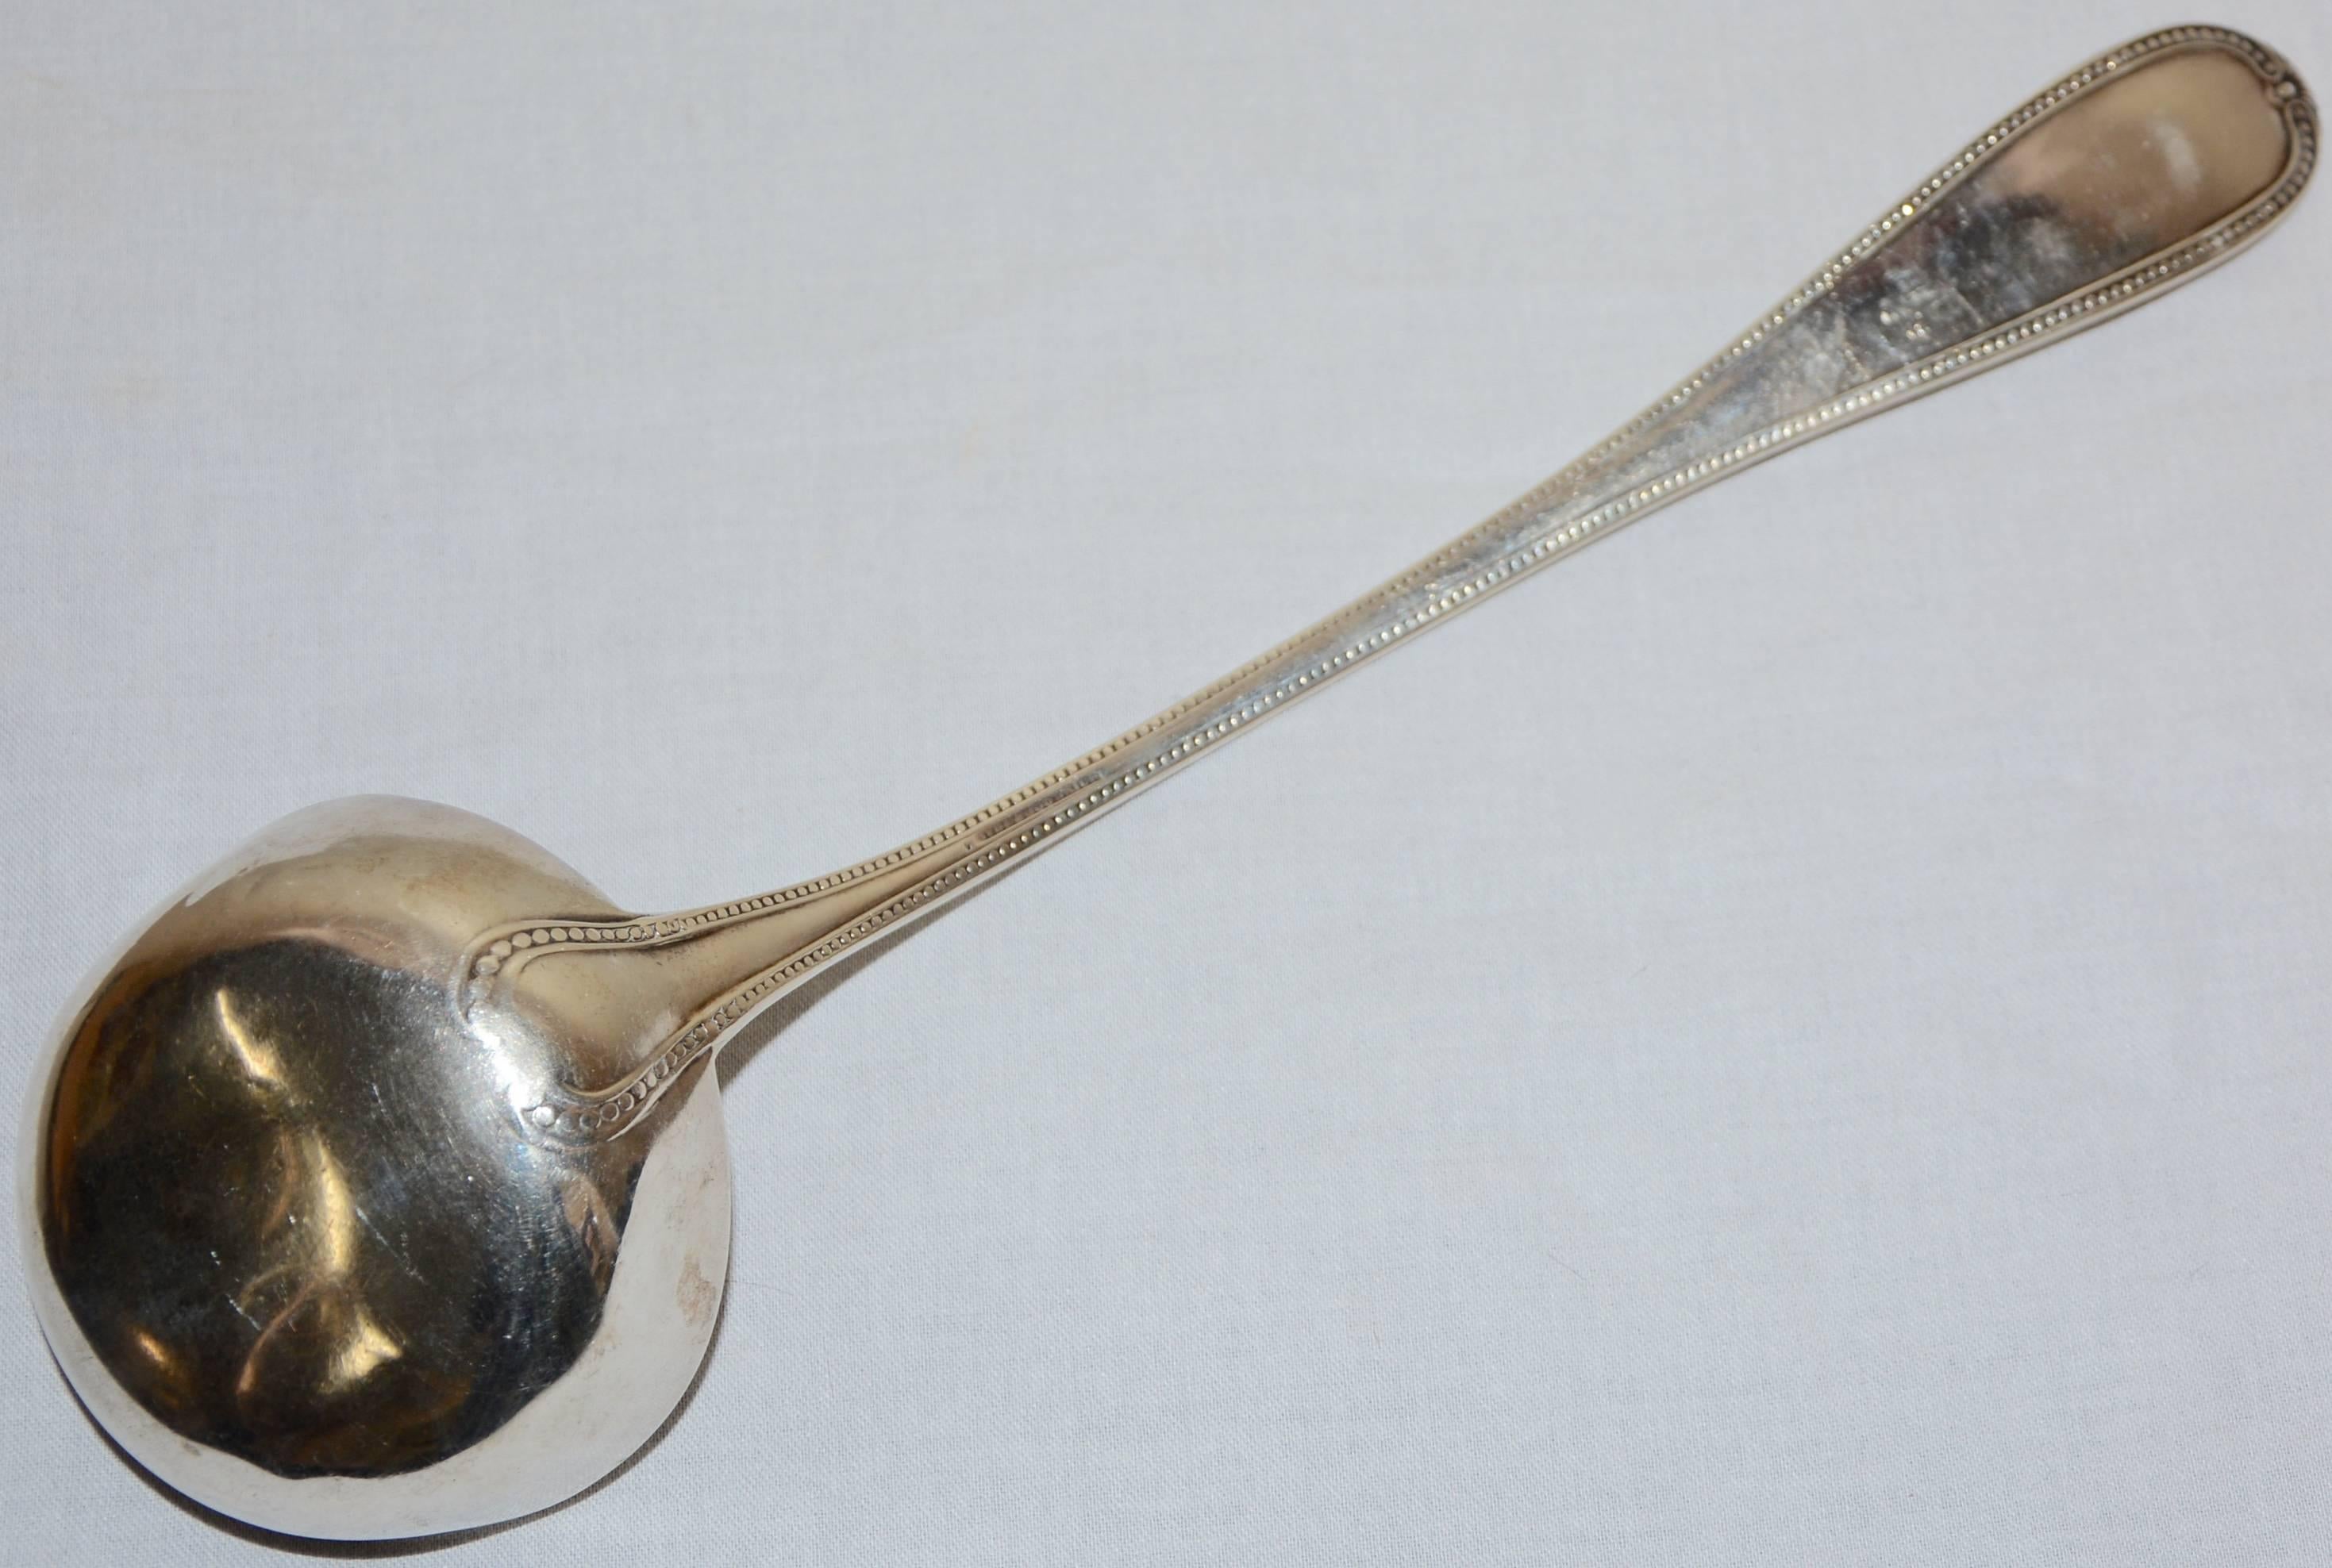 Featured is a Hyde Goodrich silver ladle, originally manufactured in New Orleans in the mid-19th century. It is enhanced with a border of dots and the handle is engraved with 